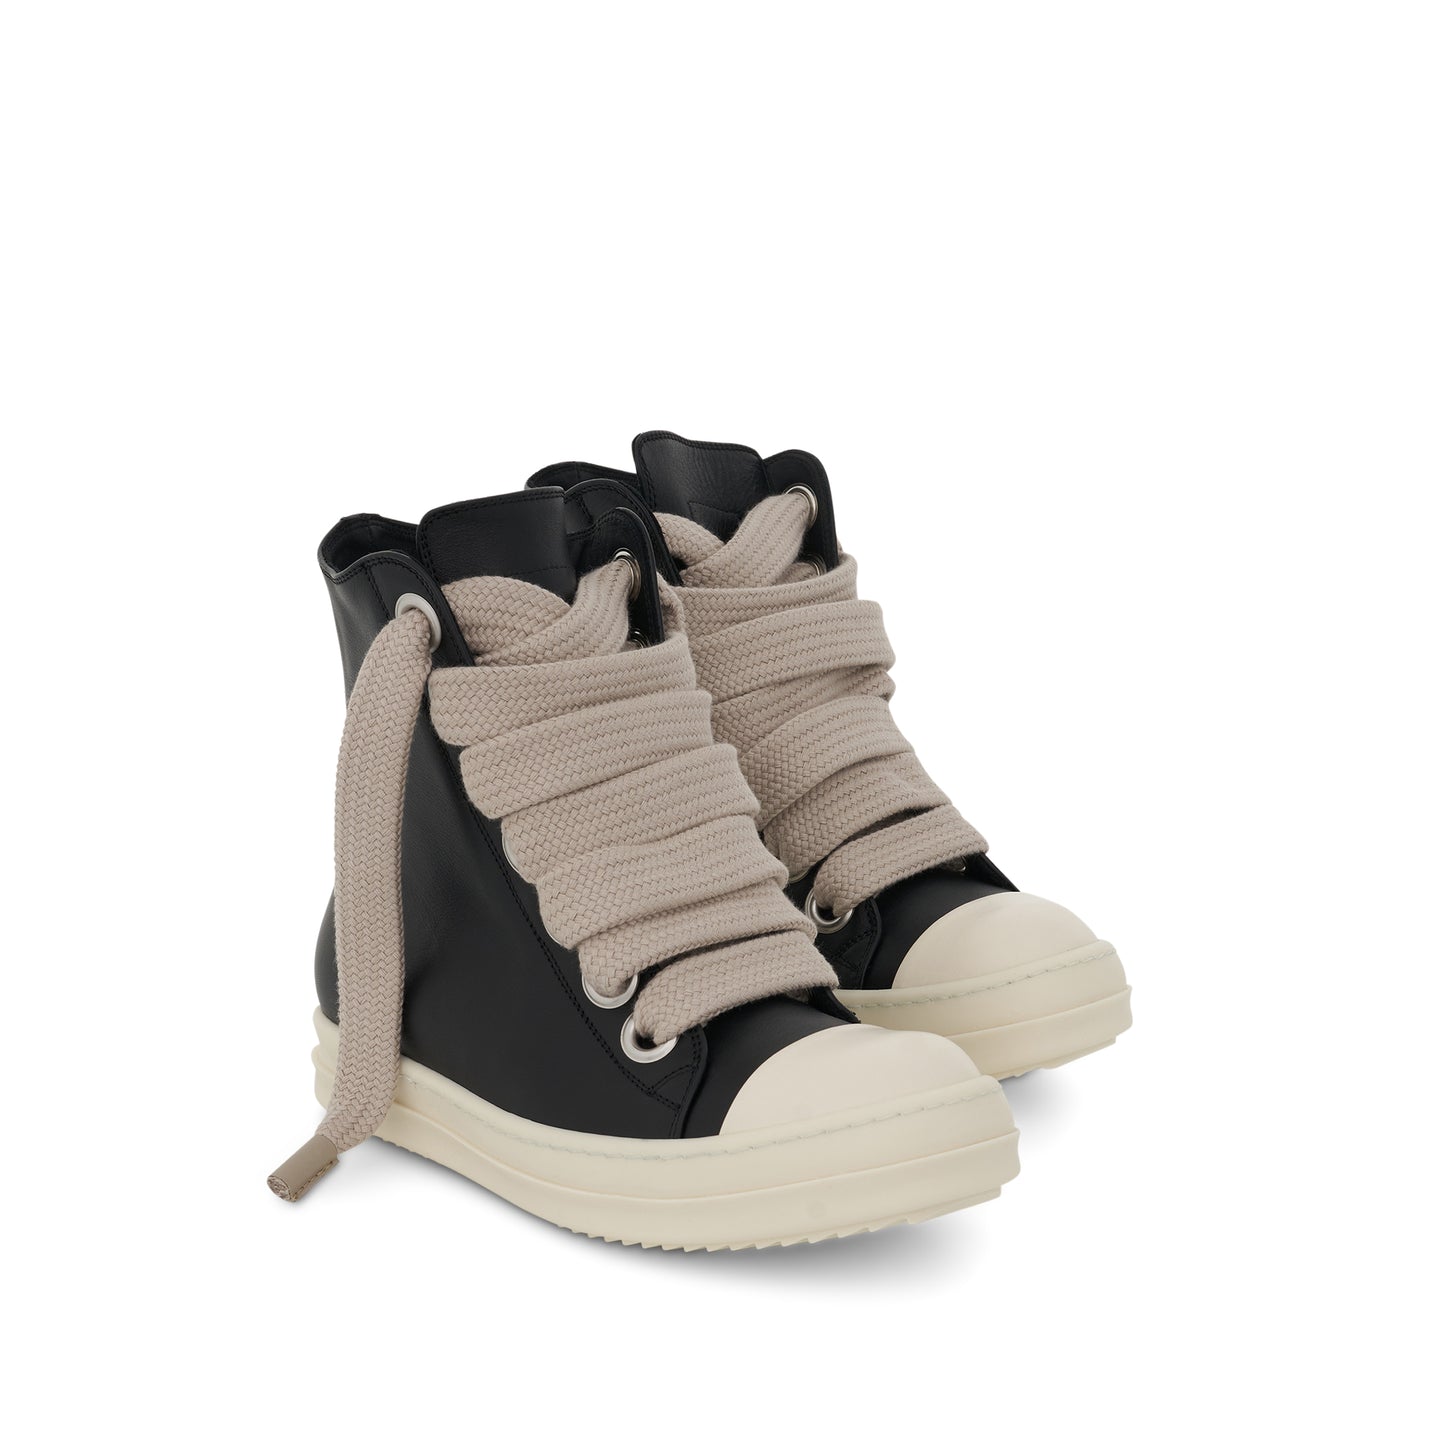 High Top Sneaker with Jumbo Laces in Black/Milk